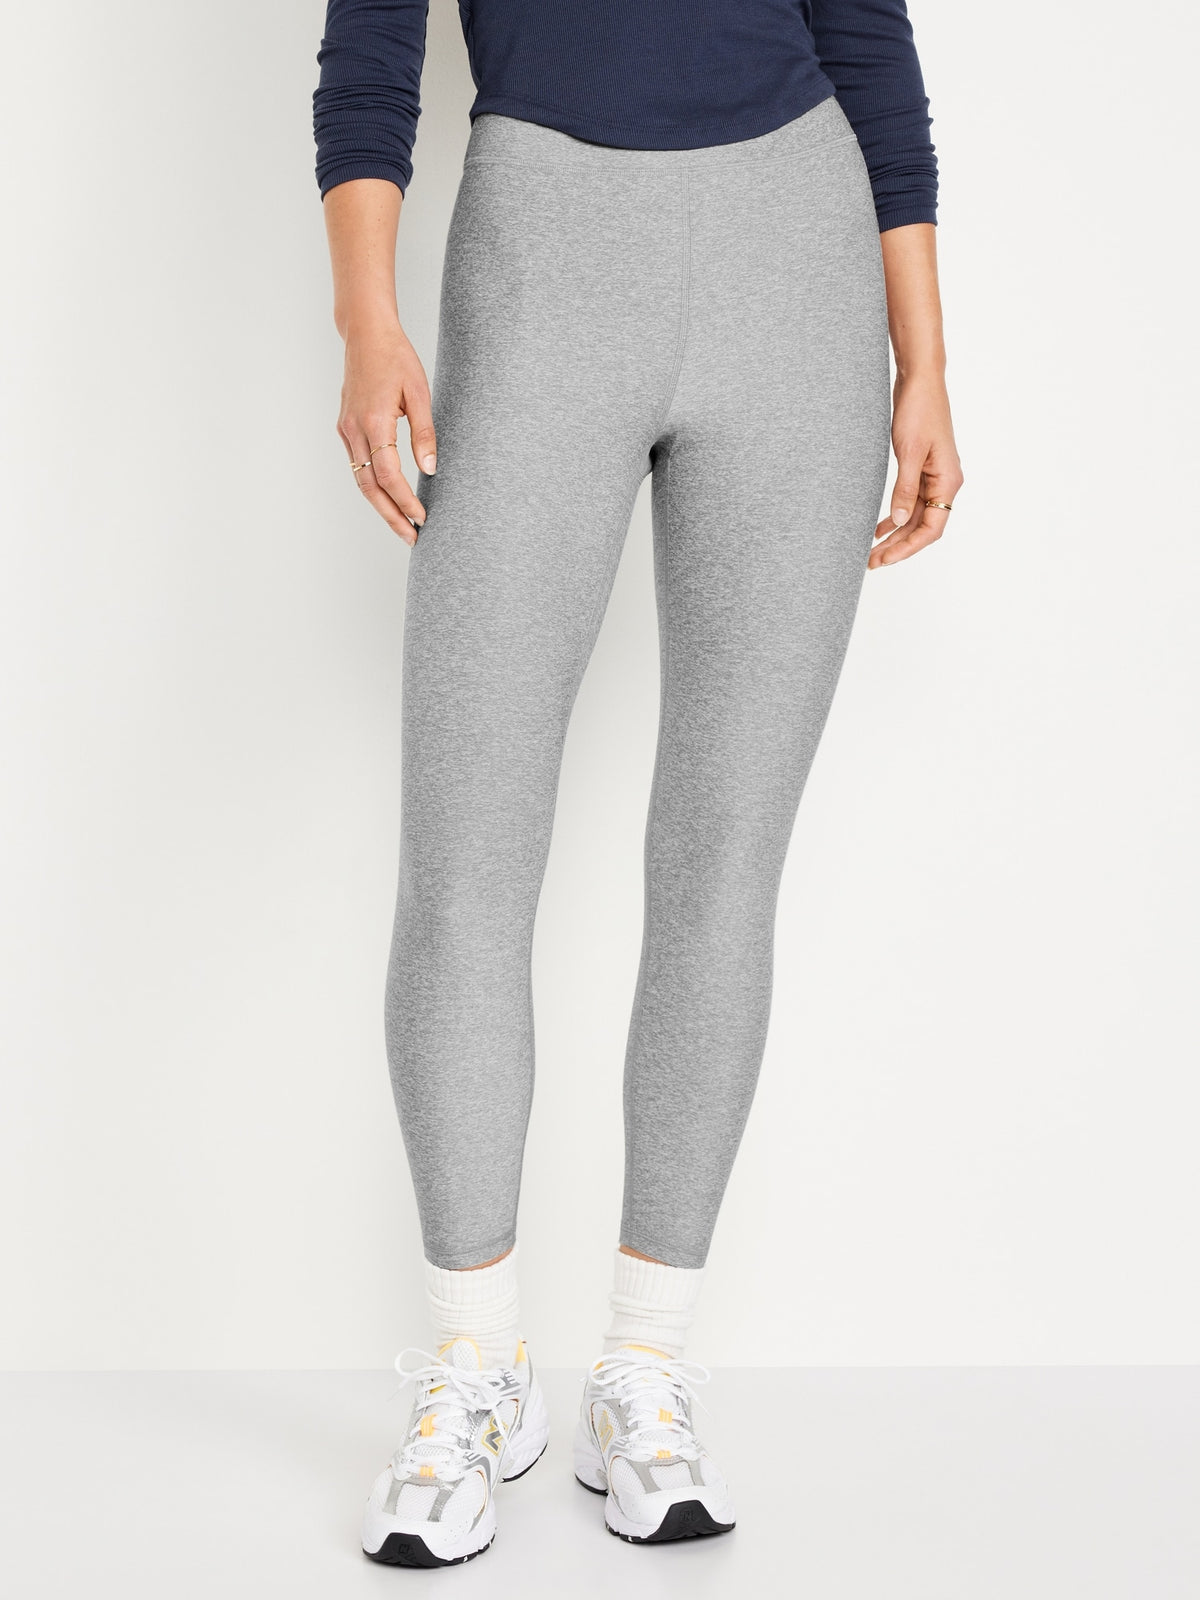 Extra High-Waisted Cloud+ 7/8 Leggings for Women - Old Navy Philippines